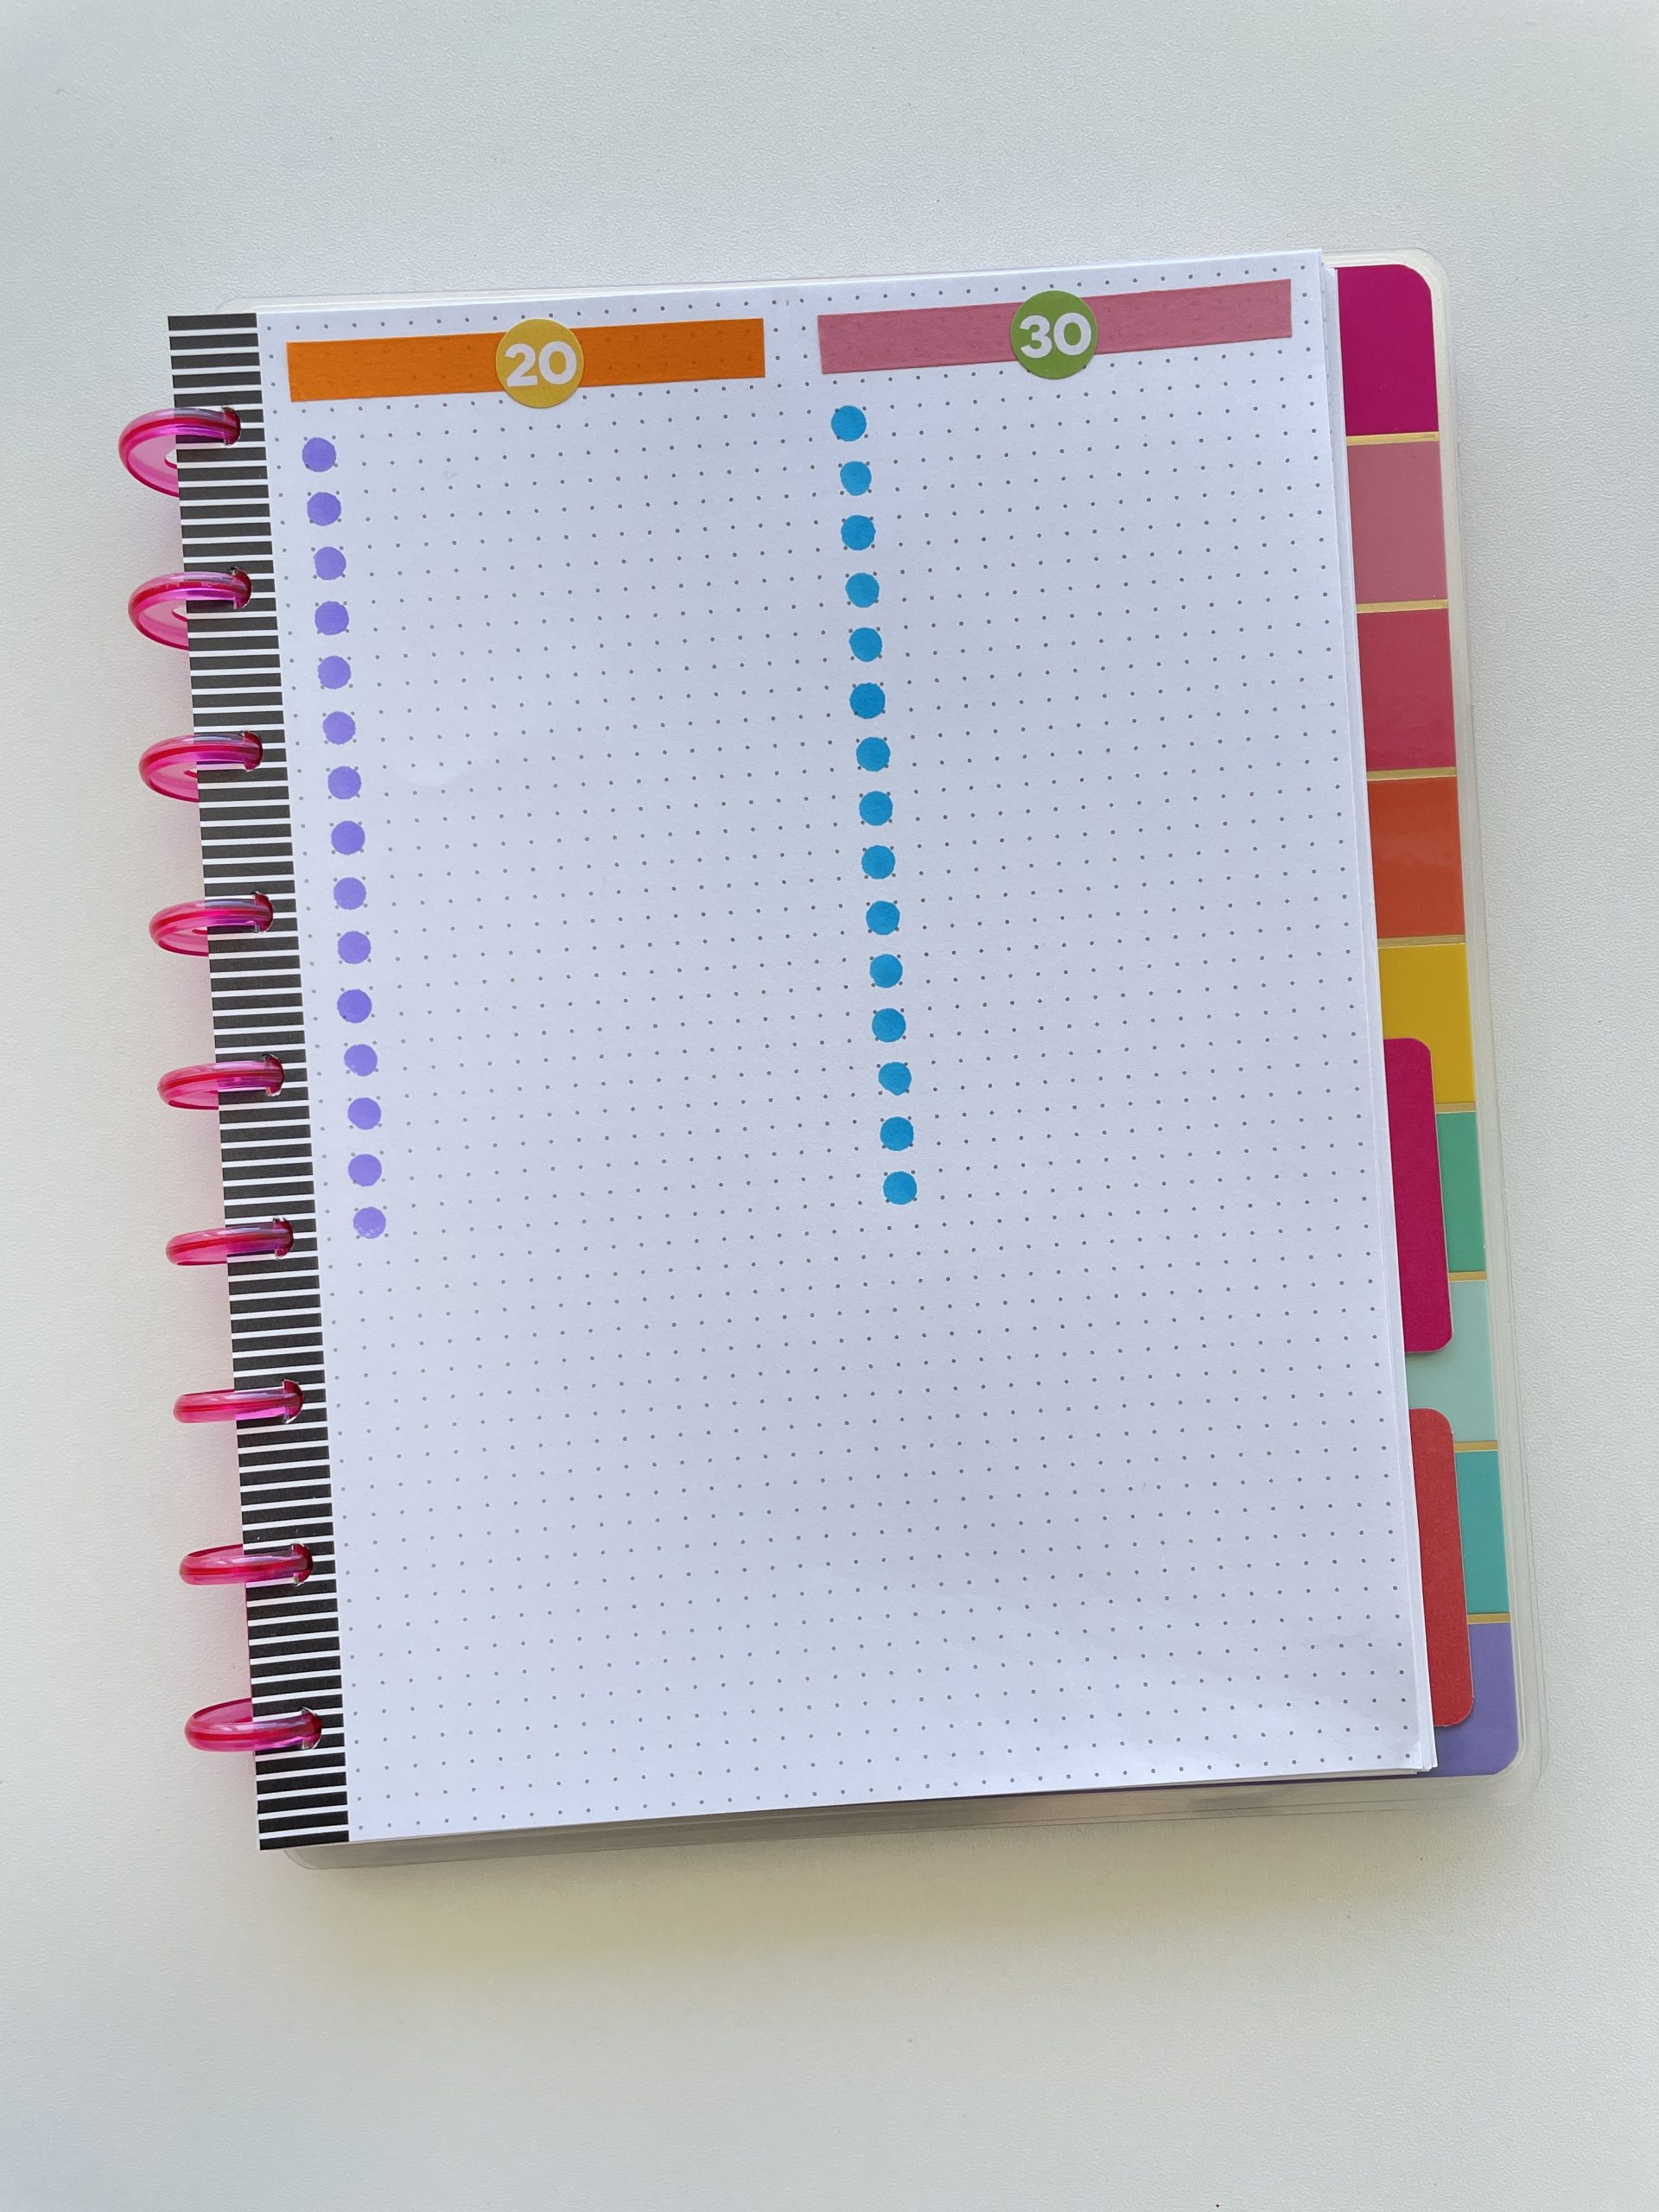 bullet journal checklist ideas to do list color coded tombow dot markers washi tape 20 minute tasks